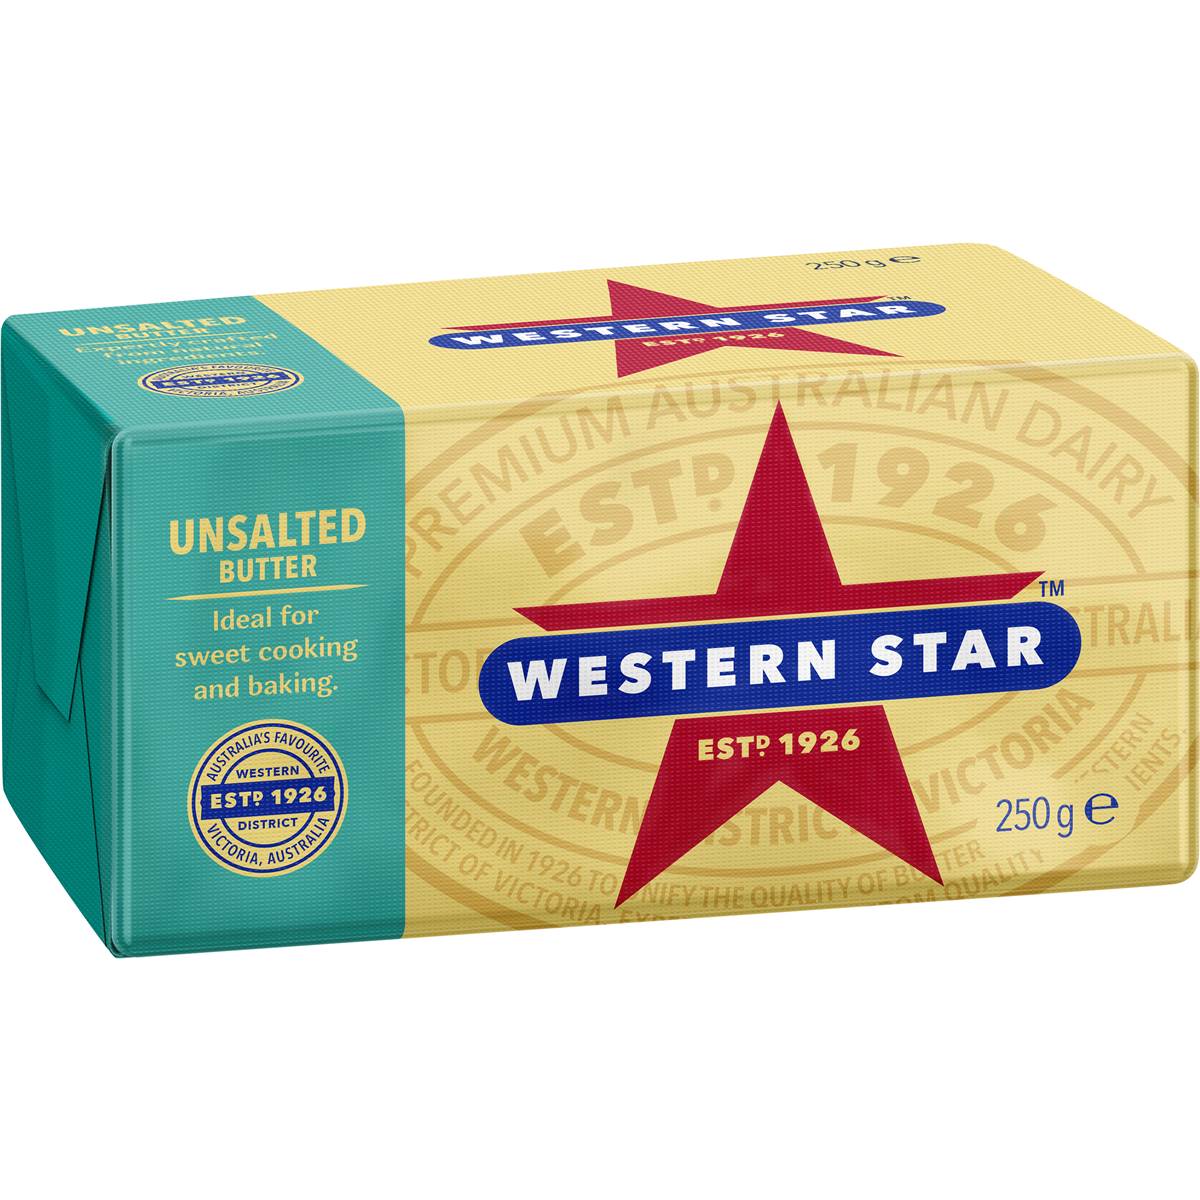 Calories in Western Star Butter Block Unsalted